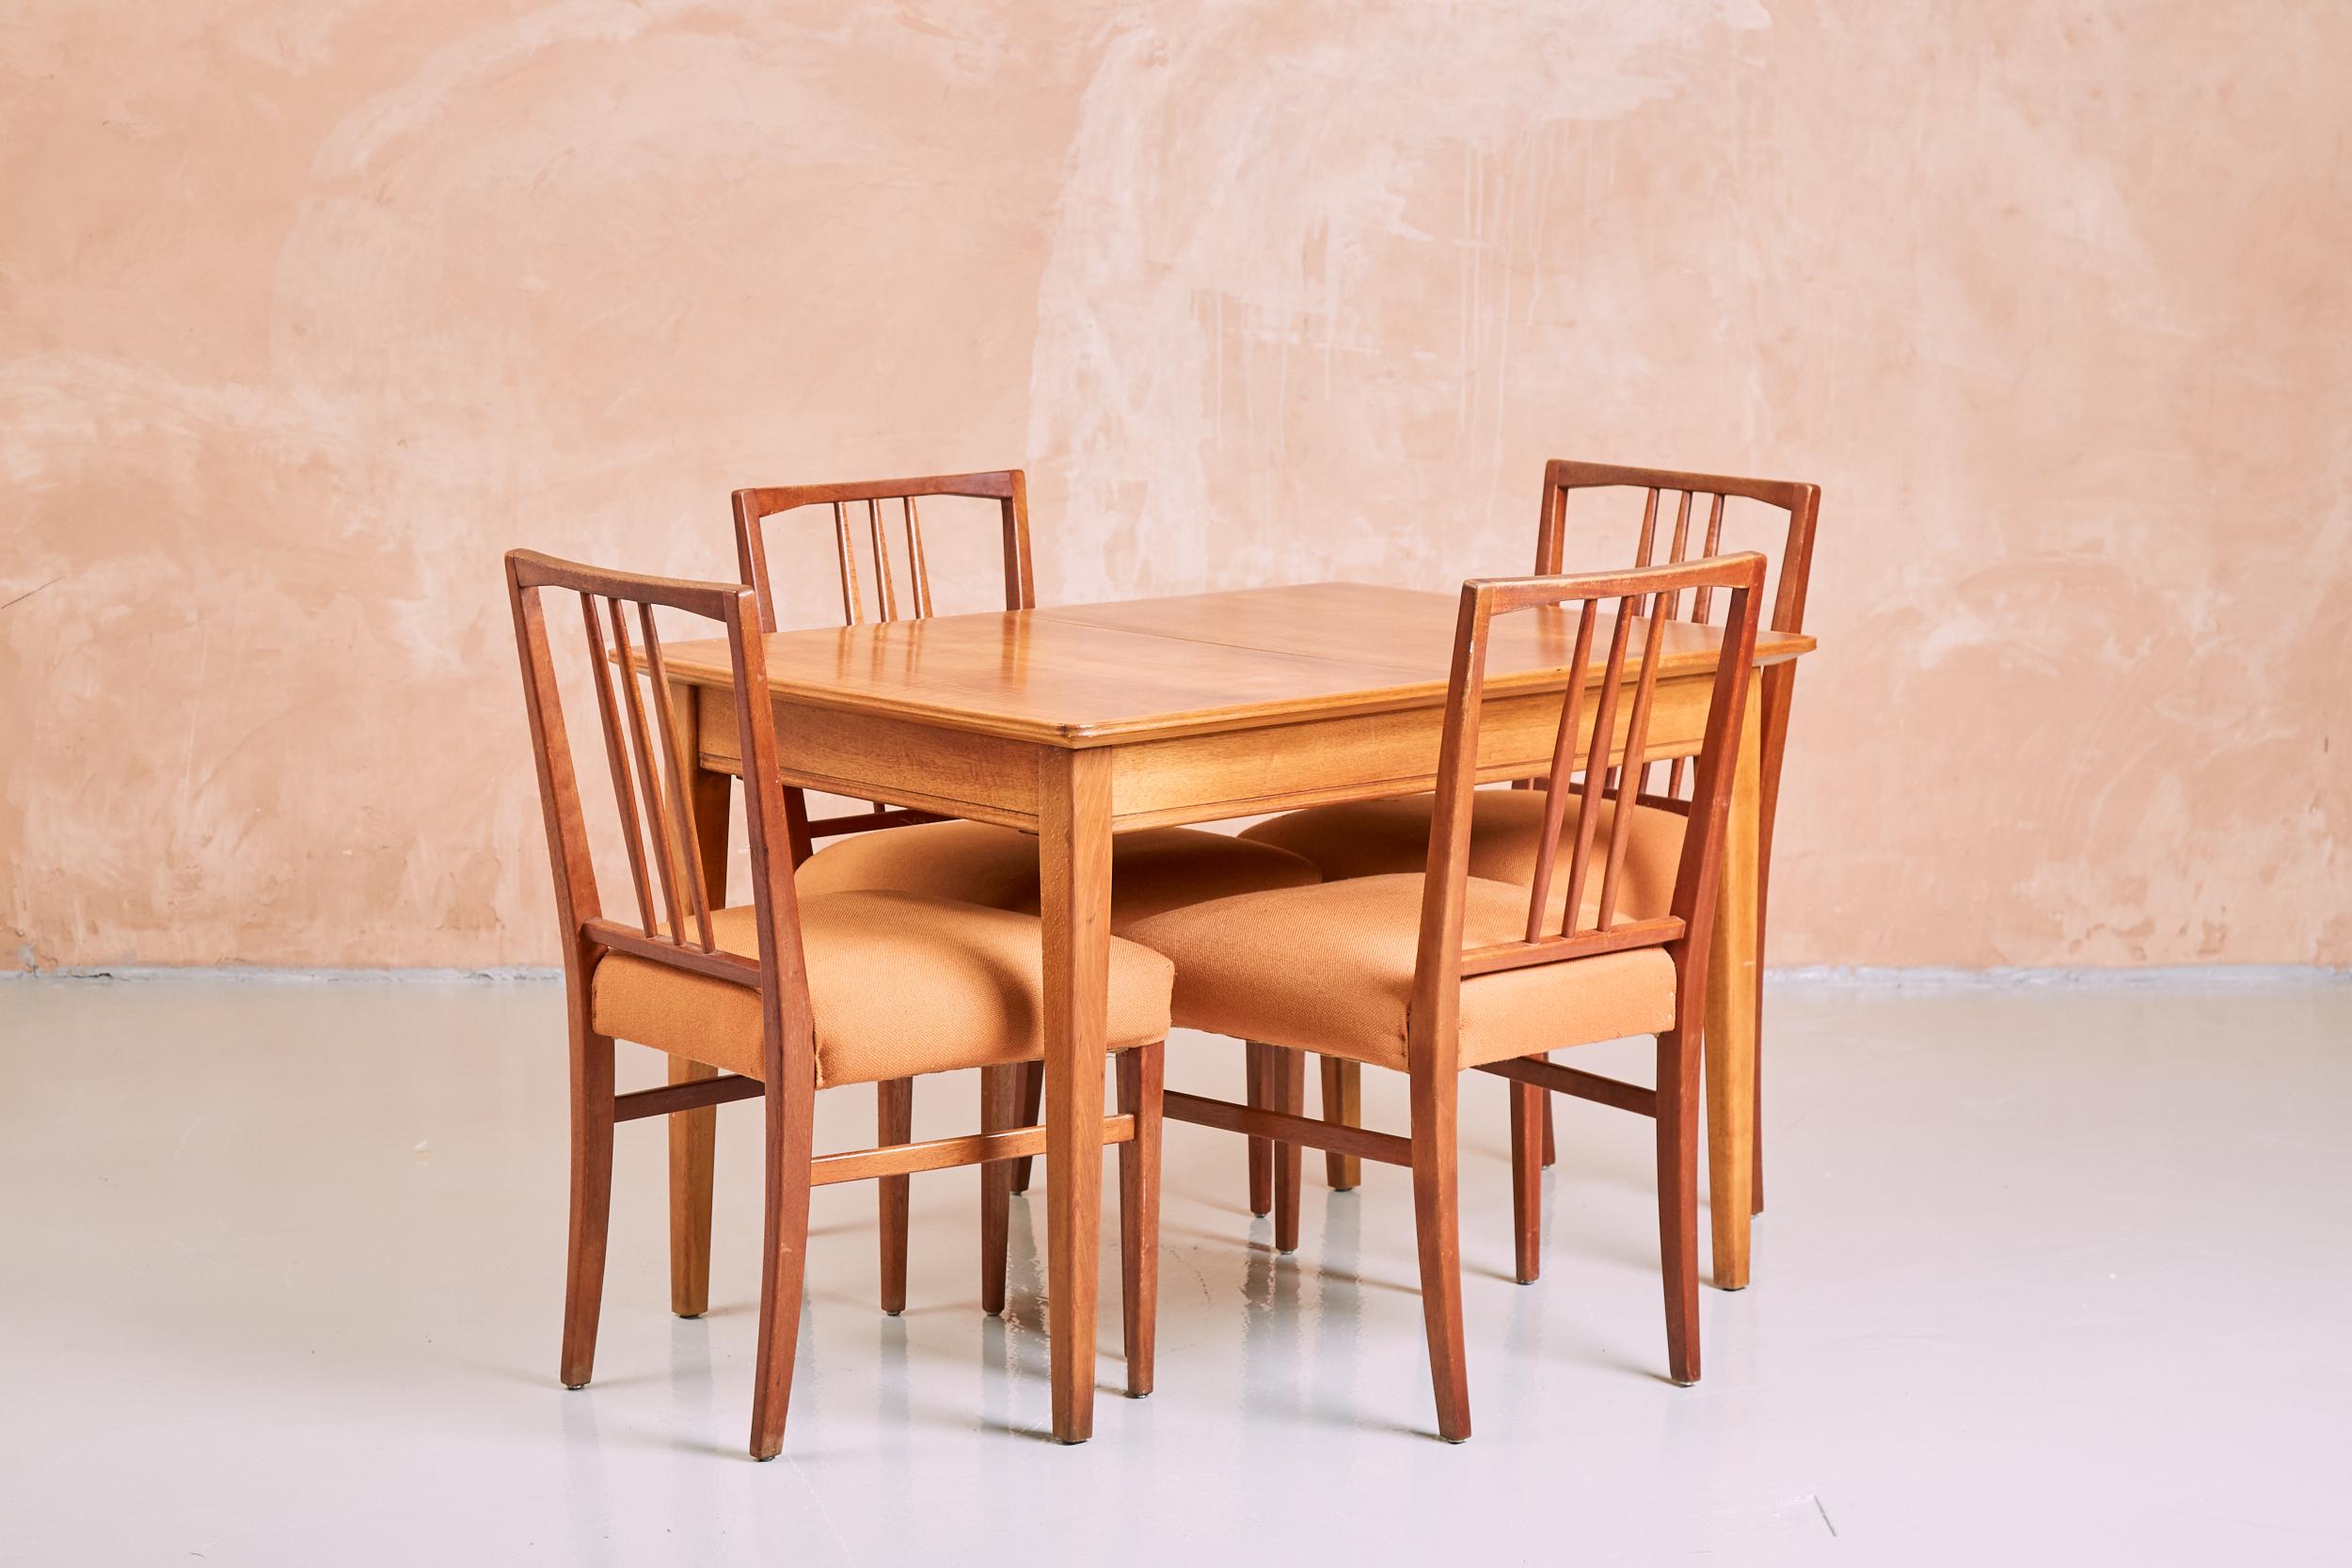 gordon russell table and chairs